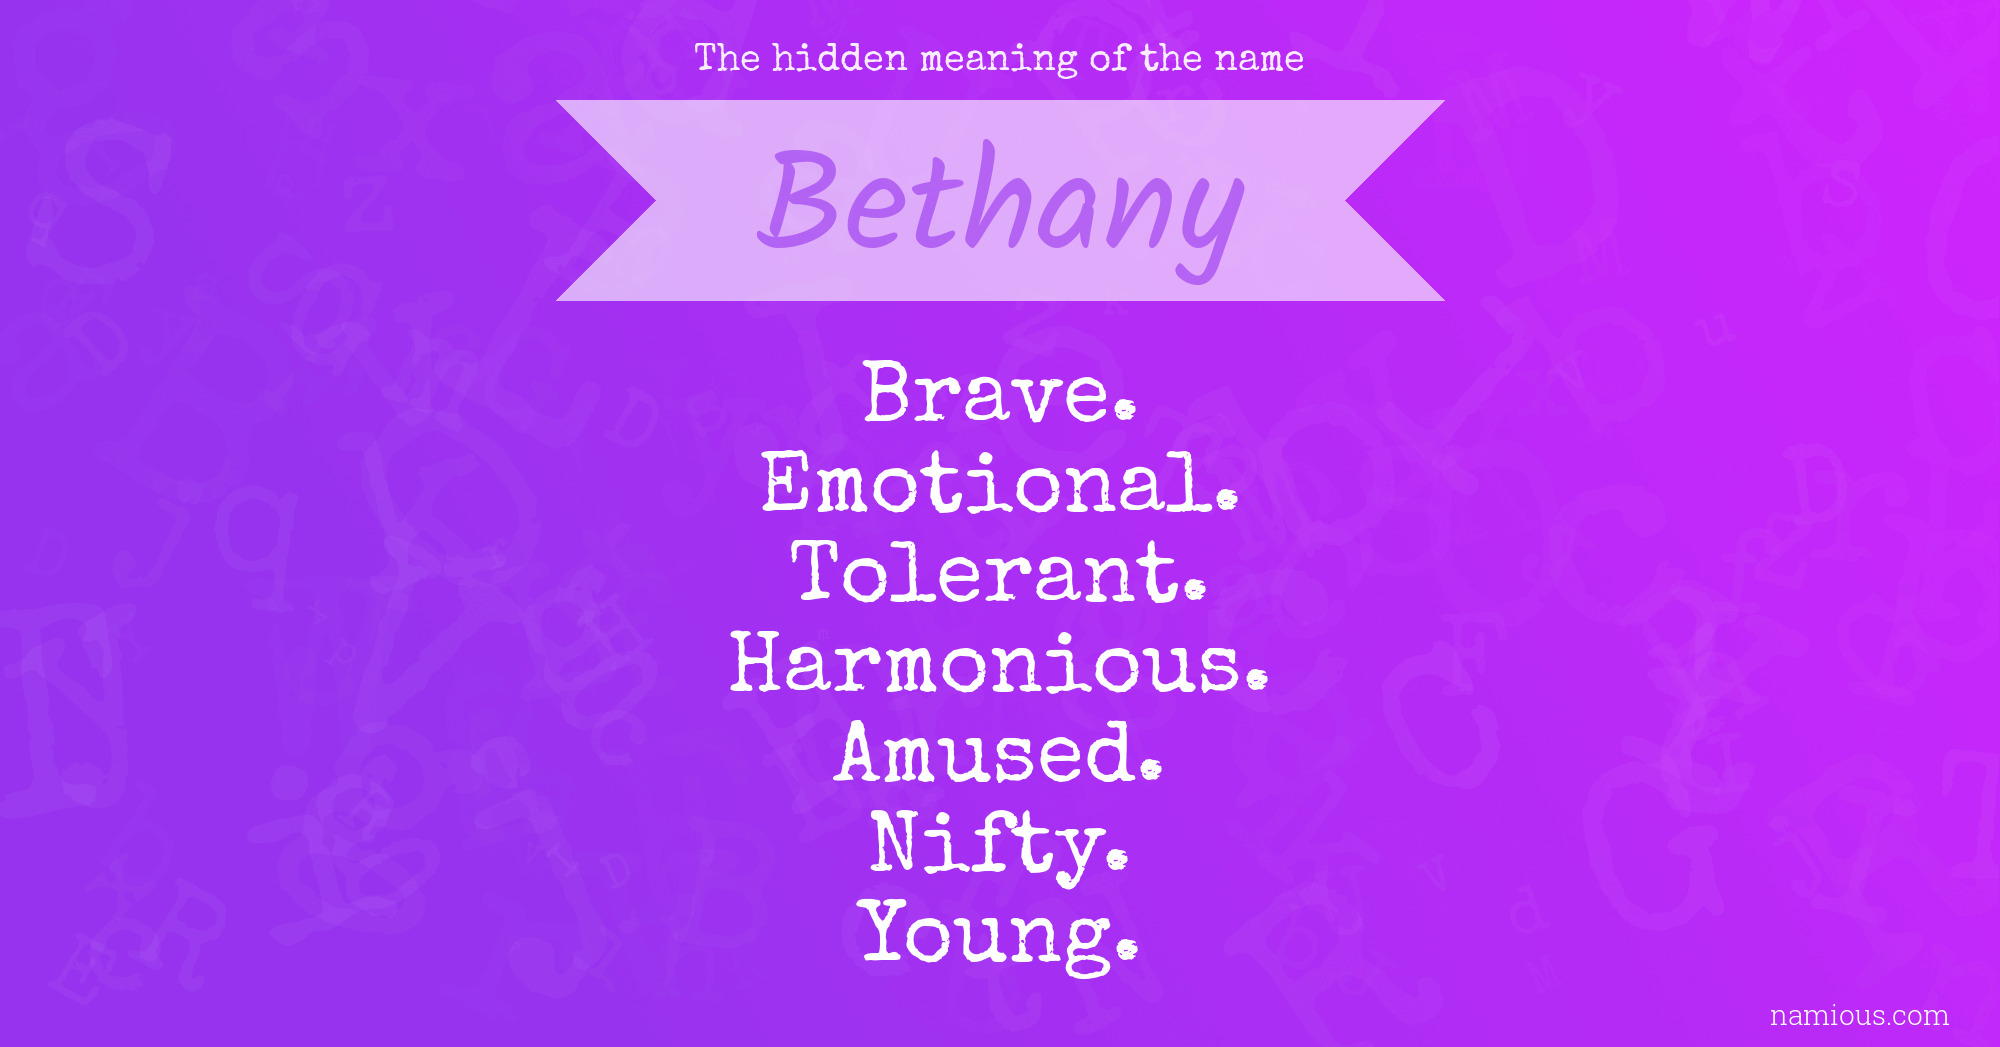 The hidden meaning of the name Bethany